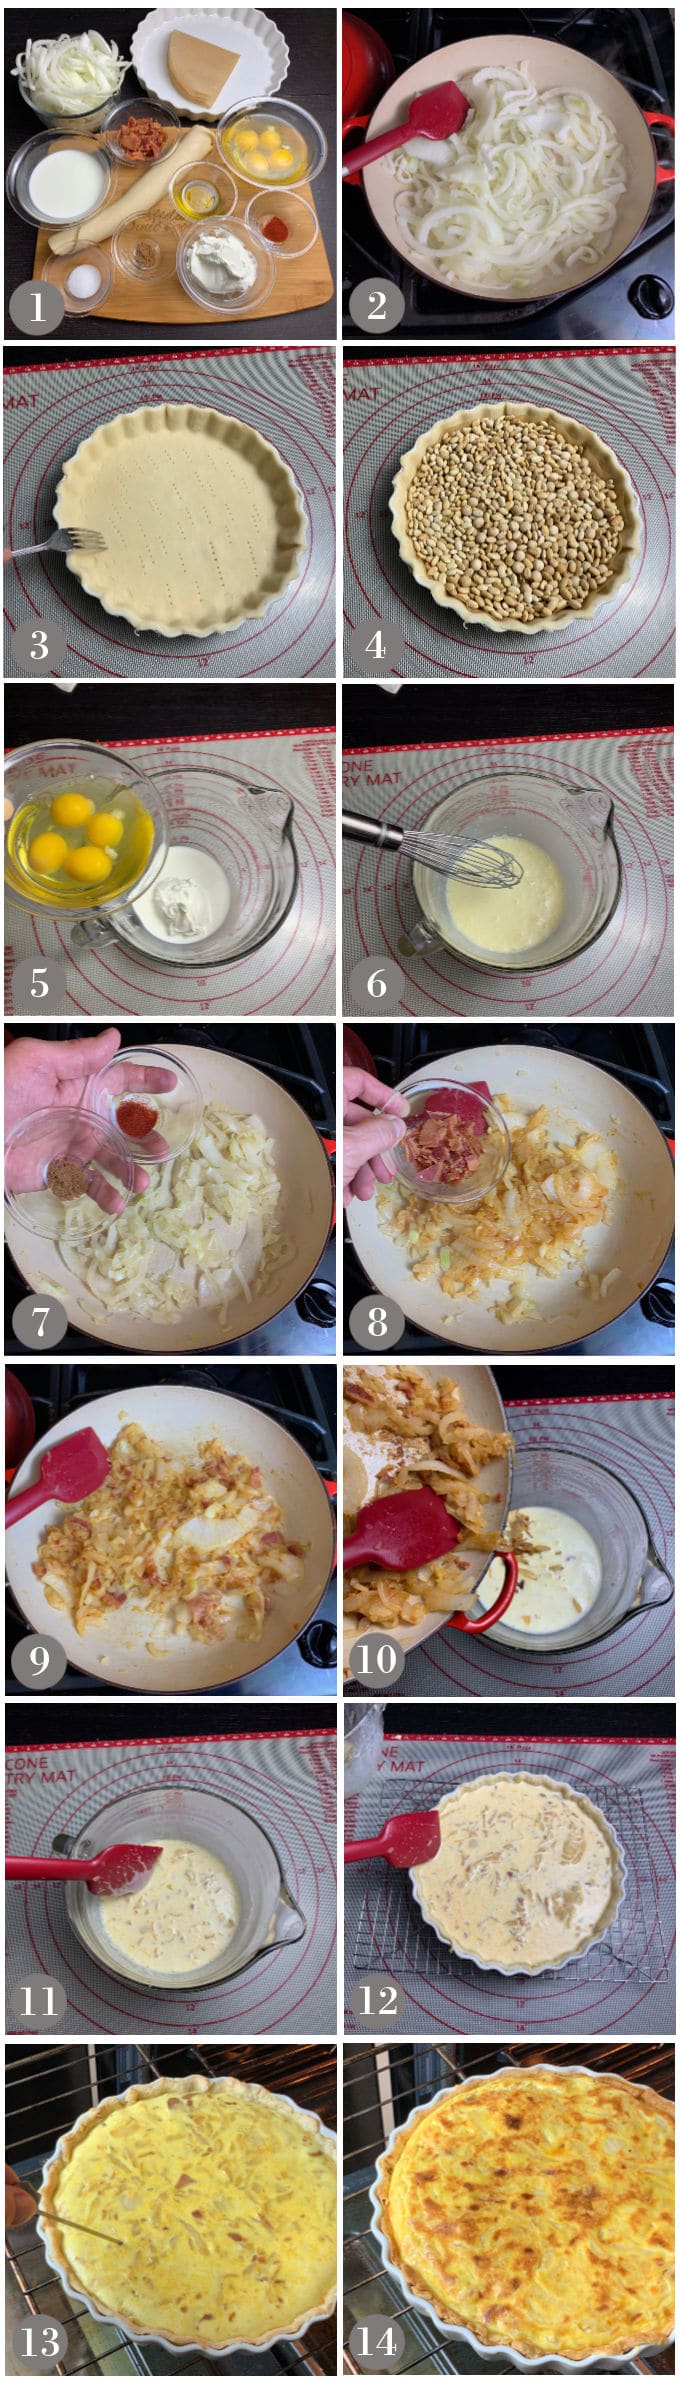 A collage of photos showing the ingredients and steps to make zwiebelkucken.